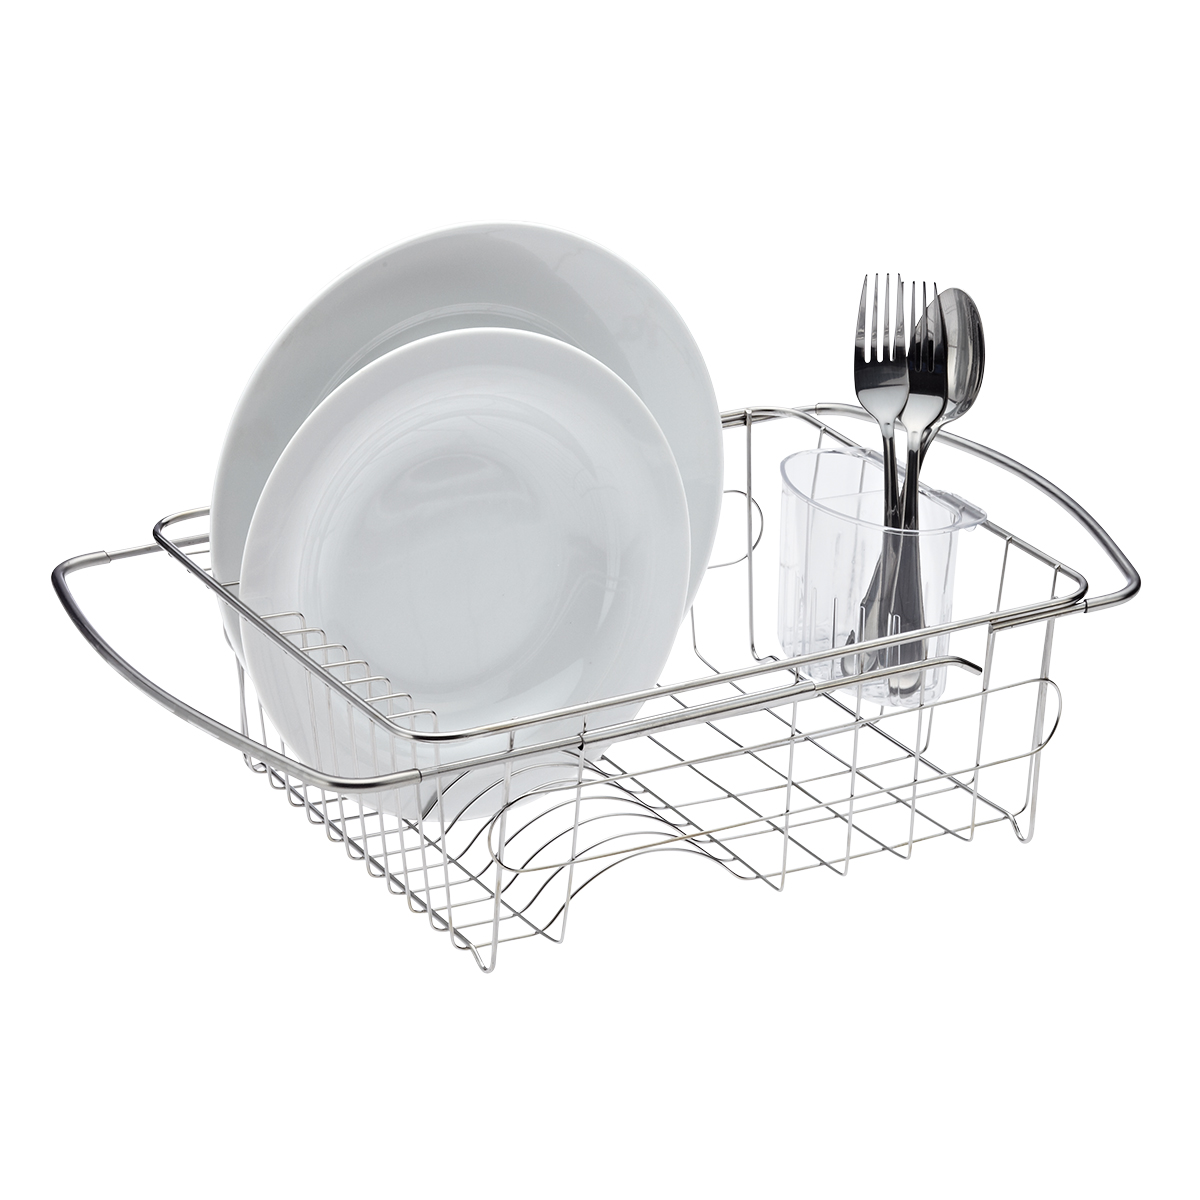 Stainless Steel In-Sink Dish Drainer | The Container Store